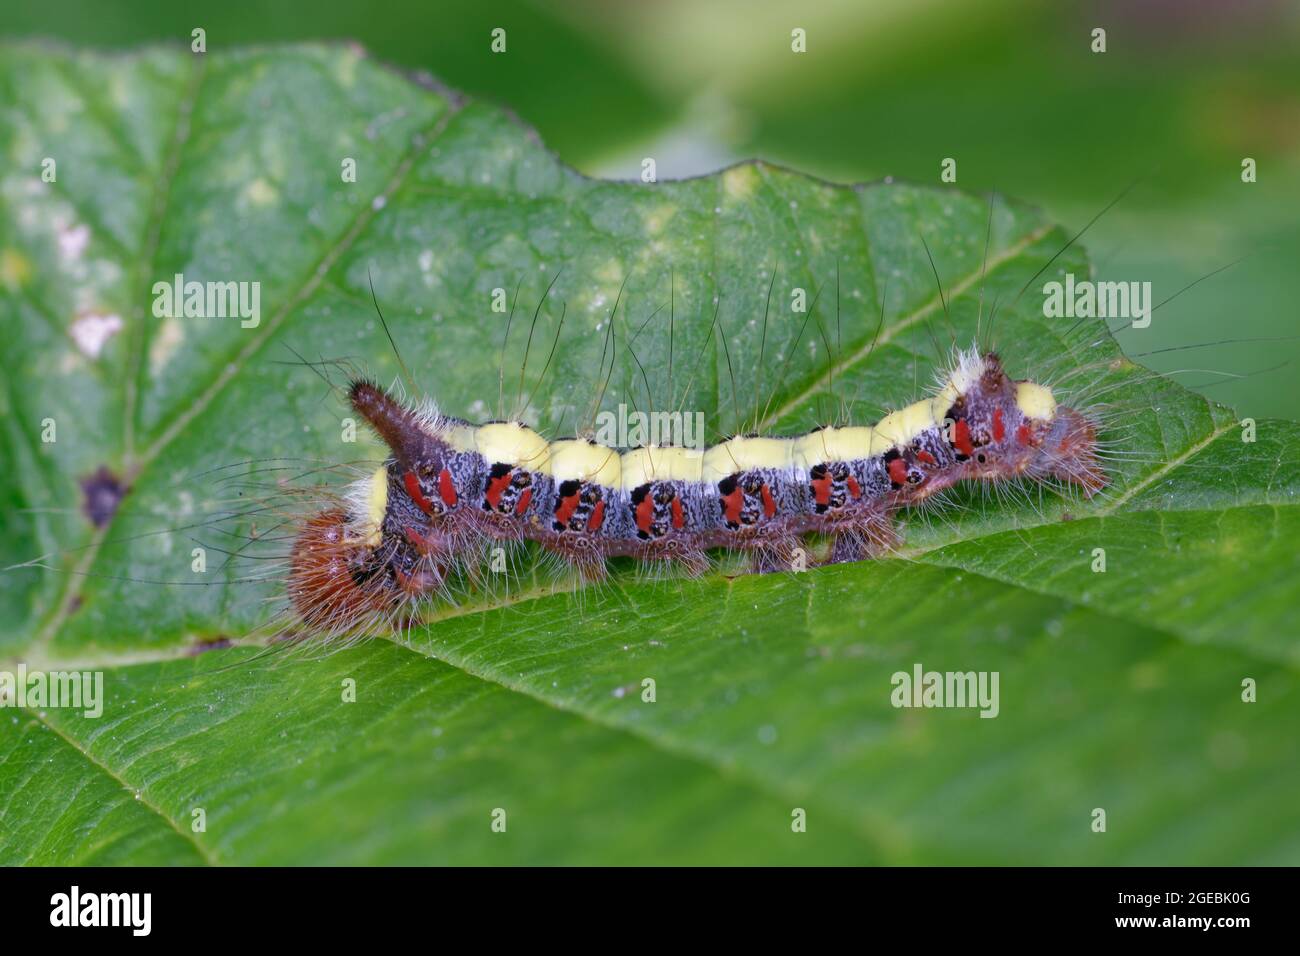 Grauer Dolch Moth - Acronicta psi, Raupe Stockfoto